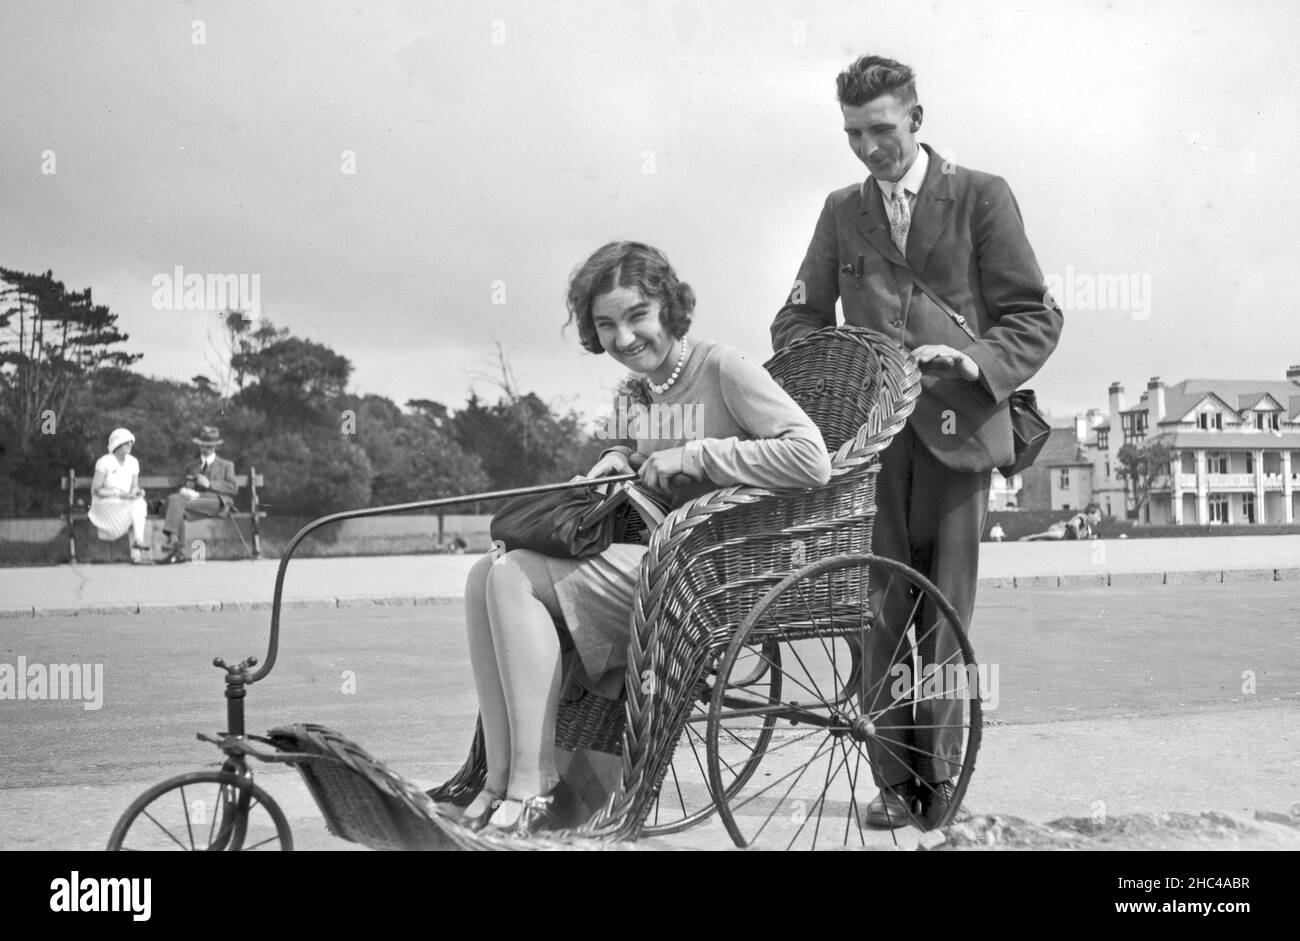 Many pushing woman seated in basket invalid wheelchair on seafront, Isle of Wight 1920s UK Stock Photo